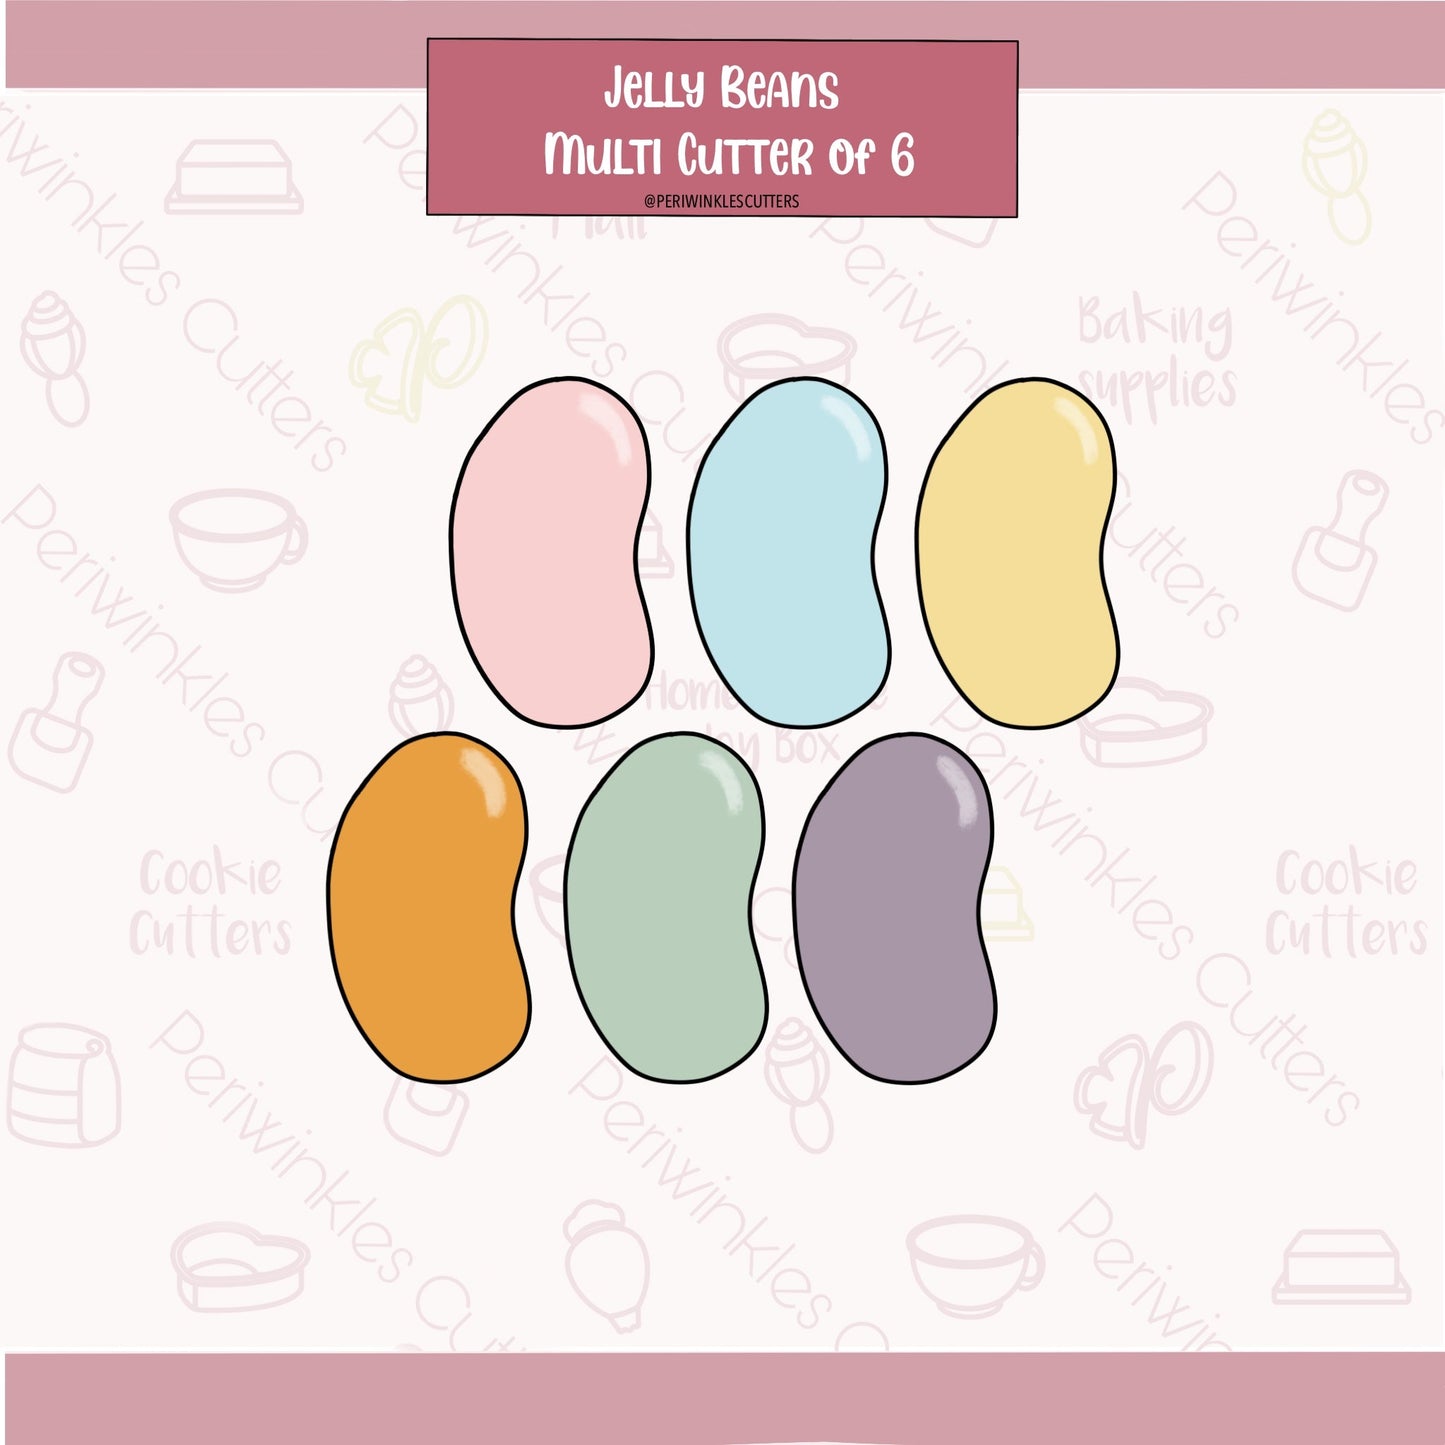 Multi Jelly Beans 6 in 1 Cookie Cutter - Periwinkles Cutters